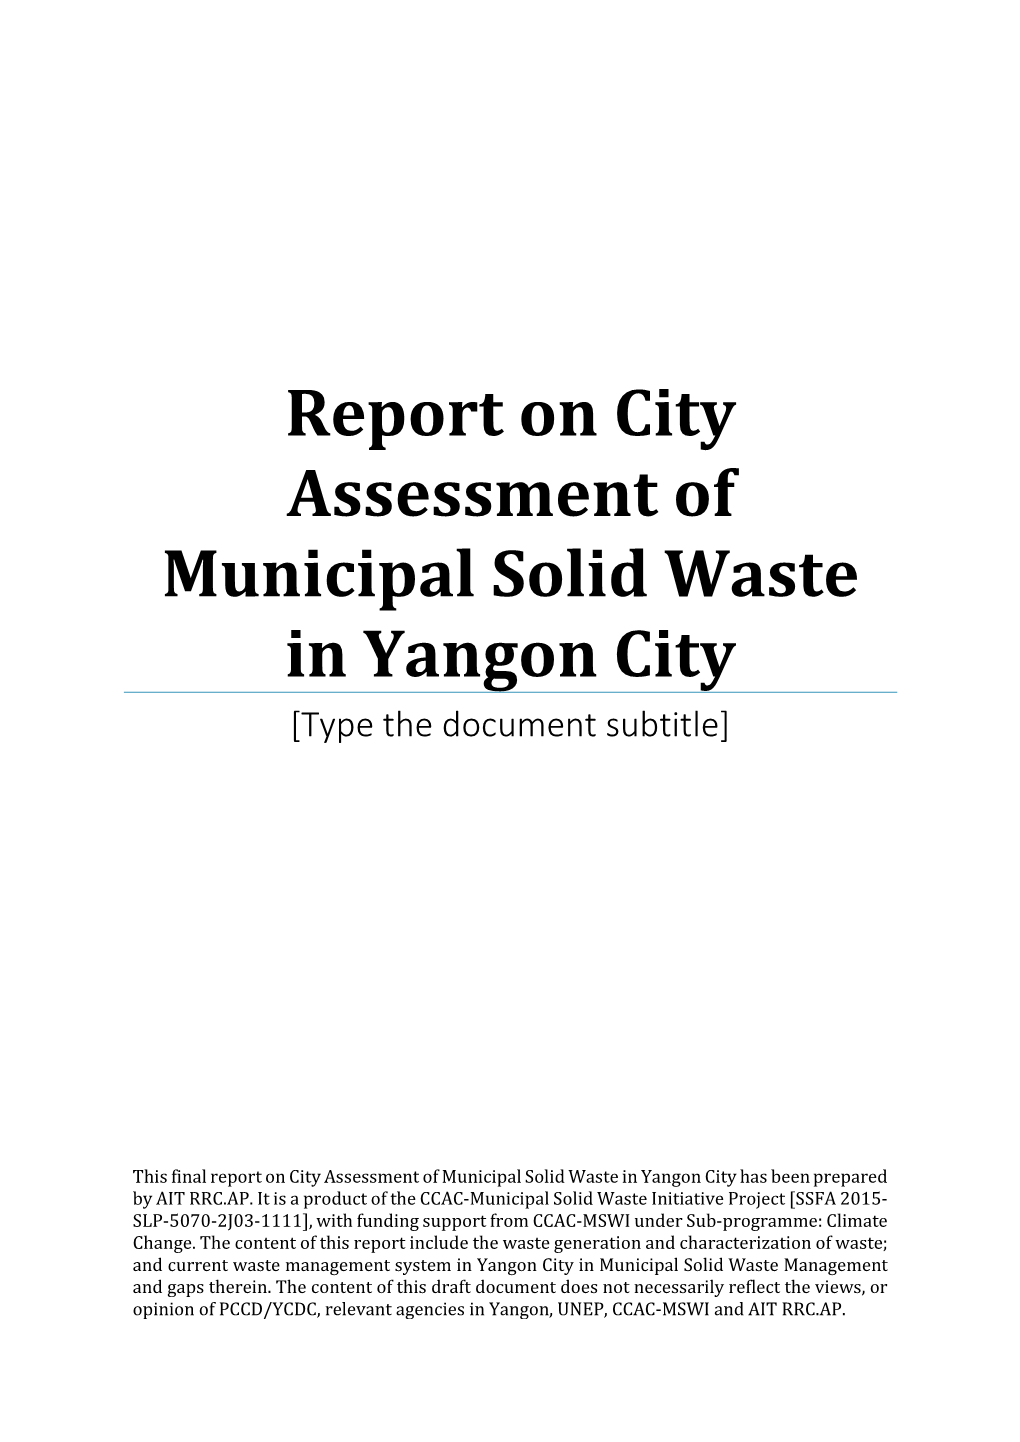 Report on City Assessment of Municipal Solid Waste in Yangon City [Type the Document Subtitle]